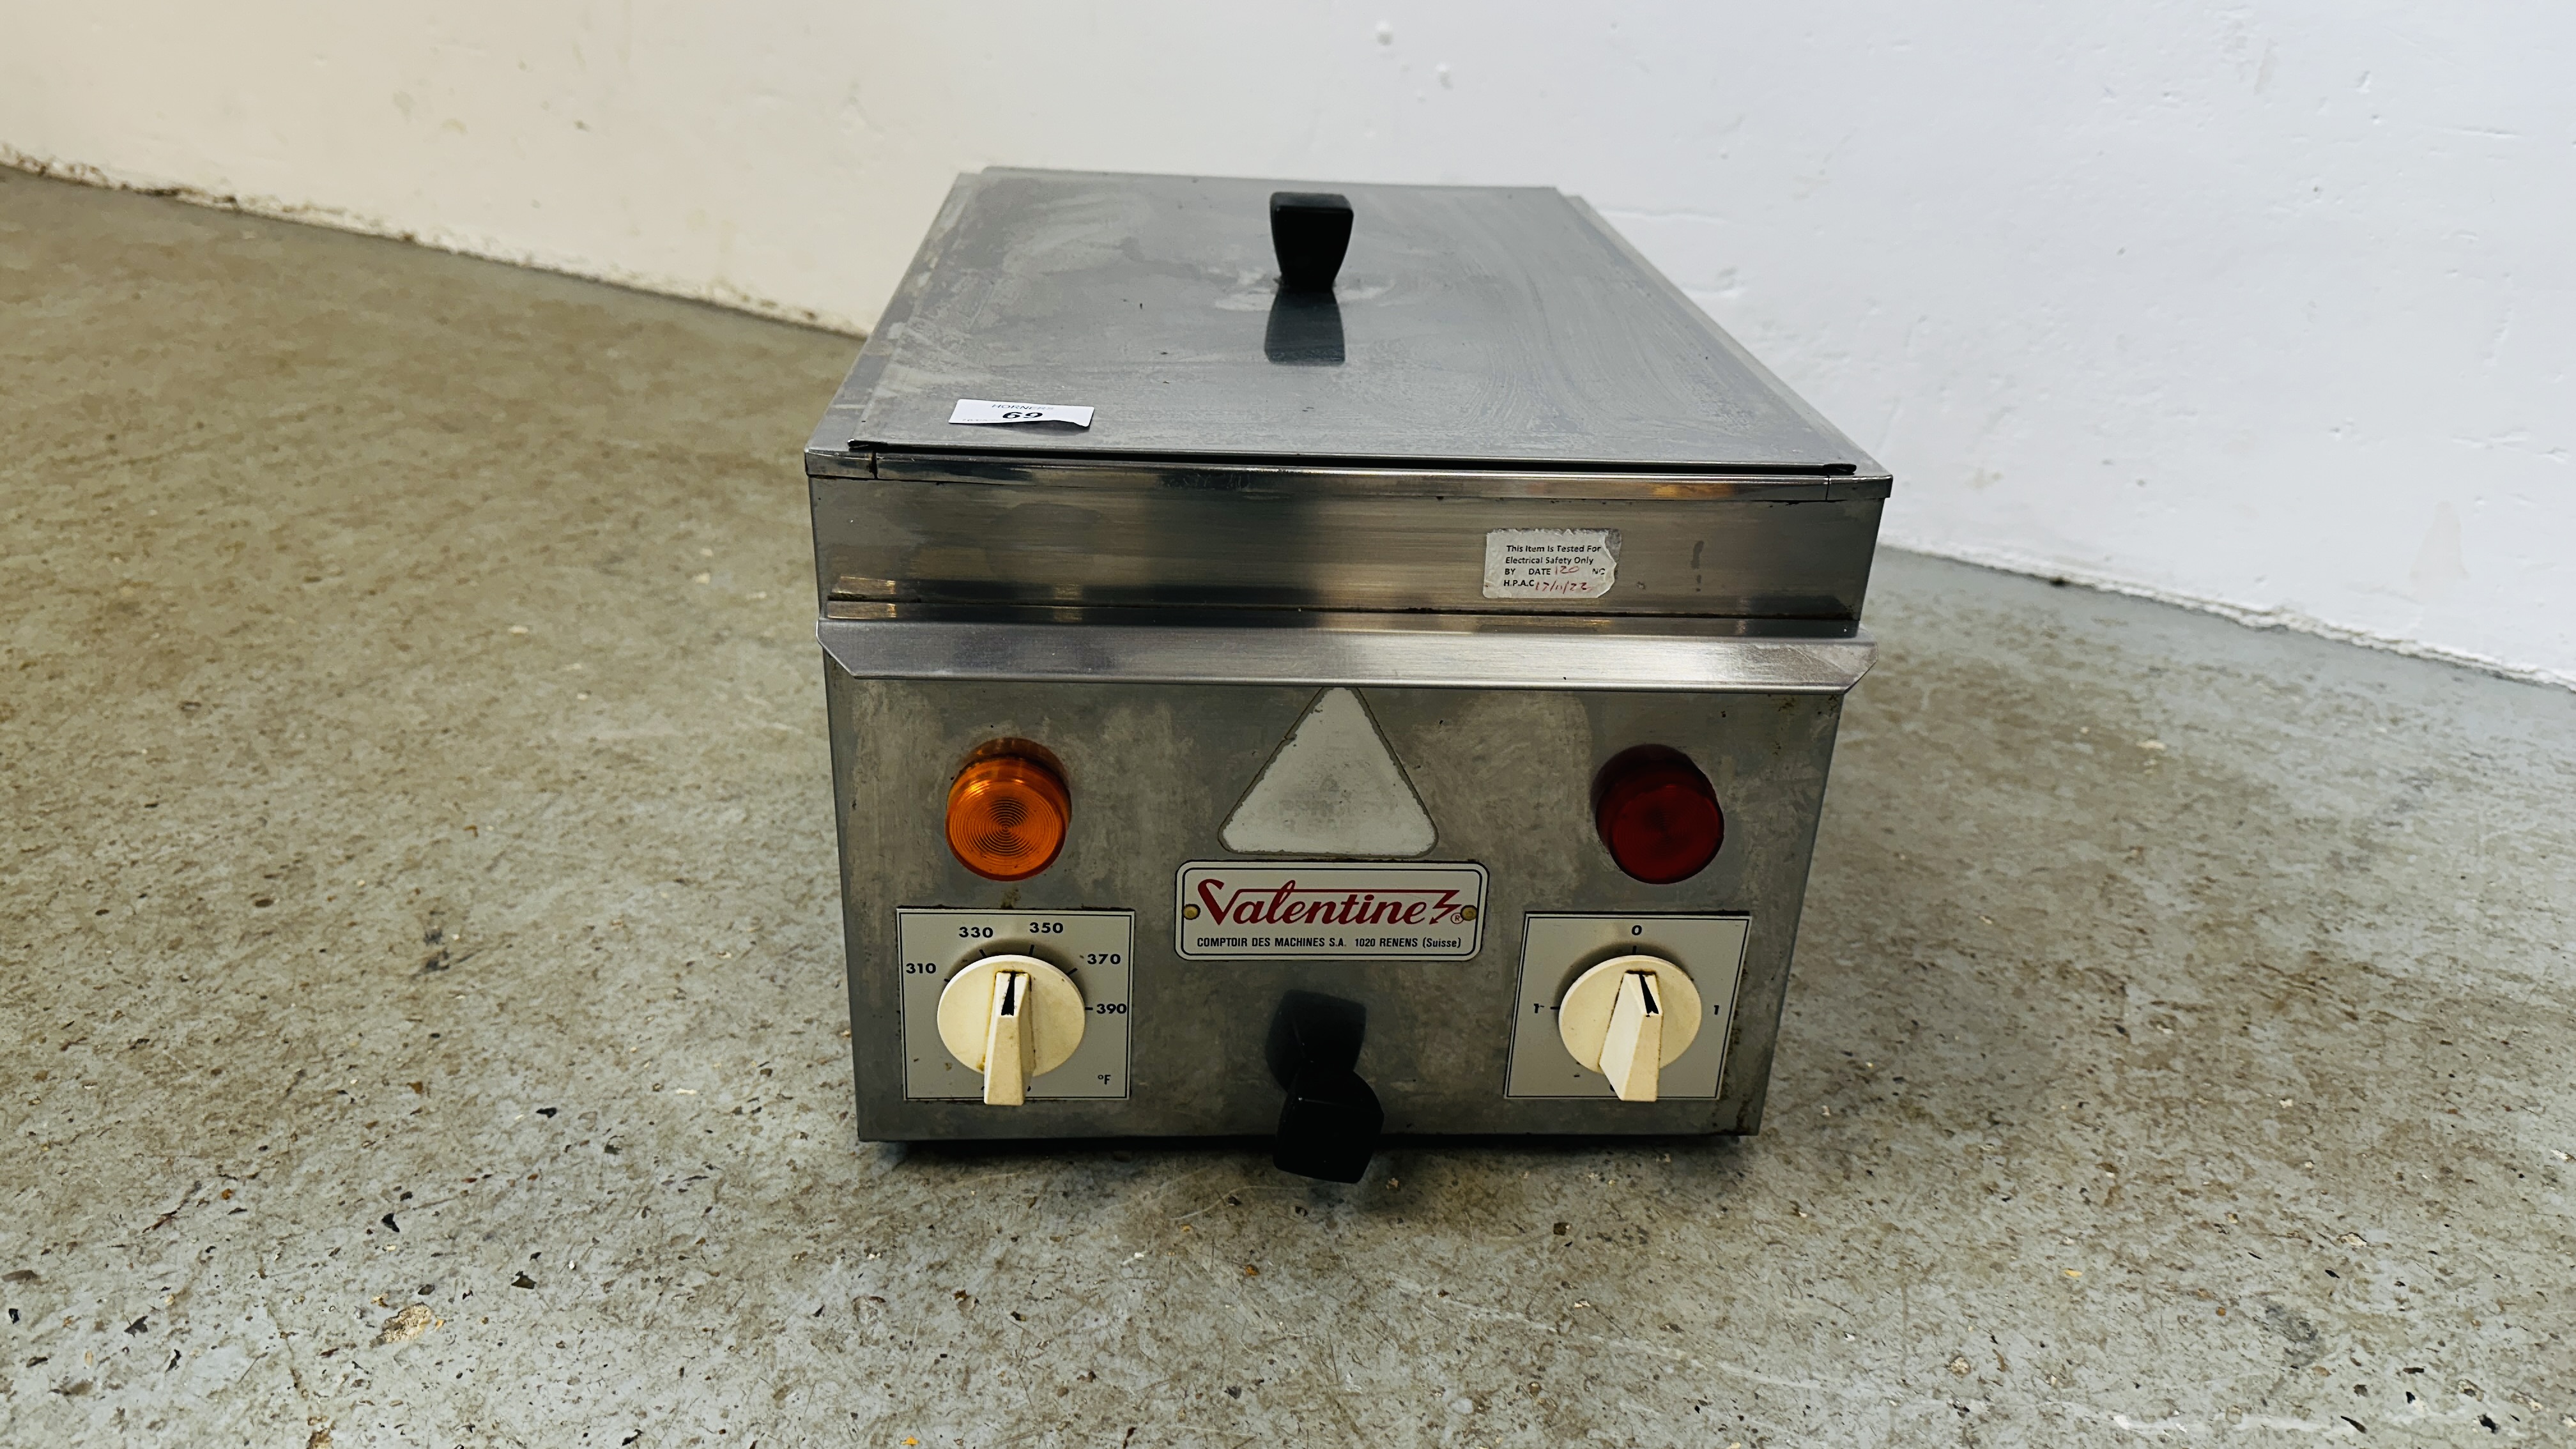 VALENTINE COUNTER TOP DEEP FAT FRYER - SOLD AS SEEN. - Image 2 of 6